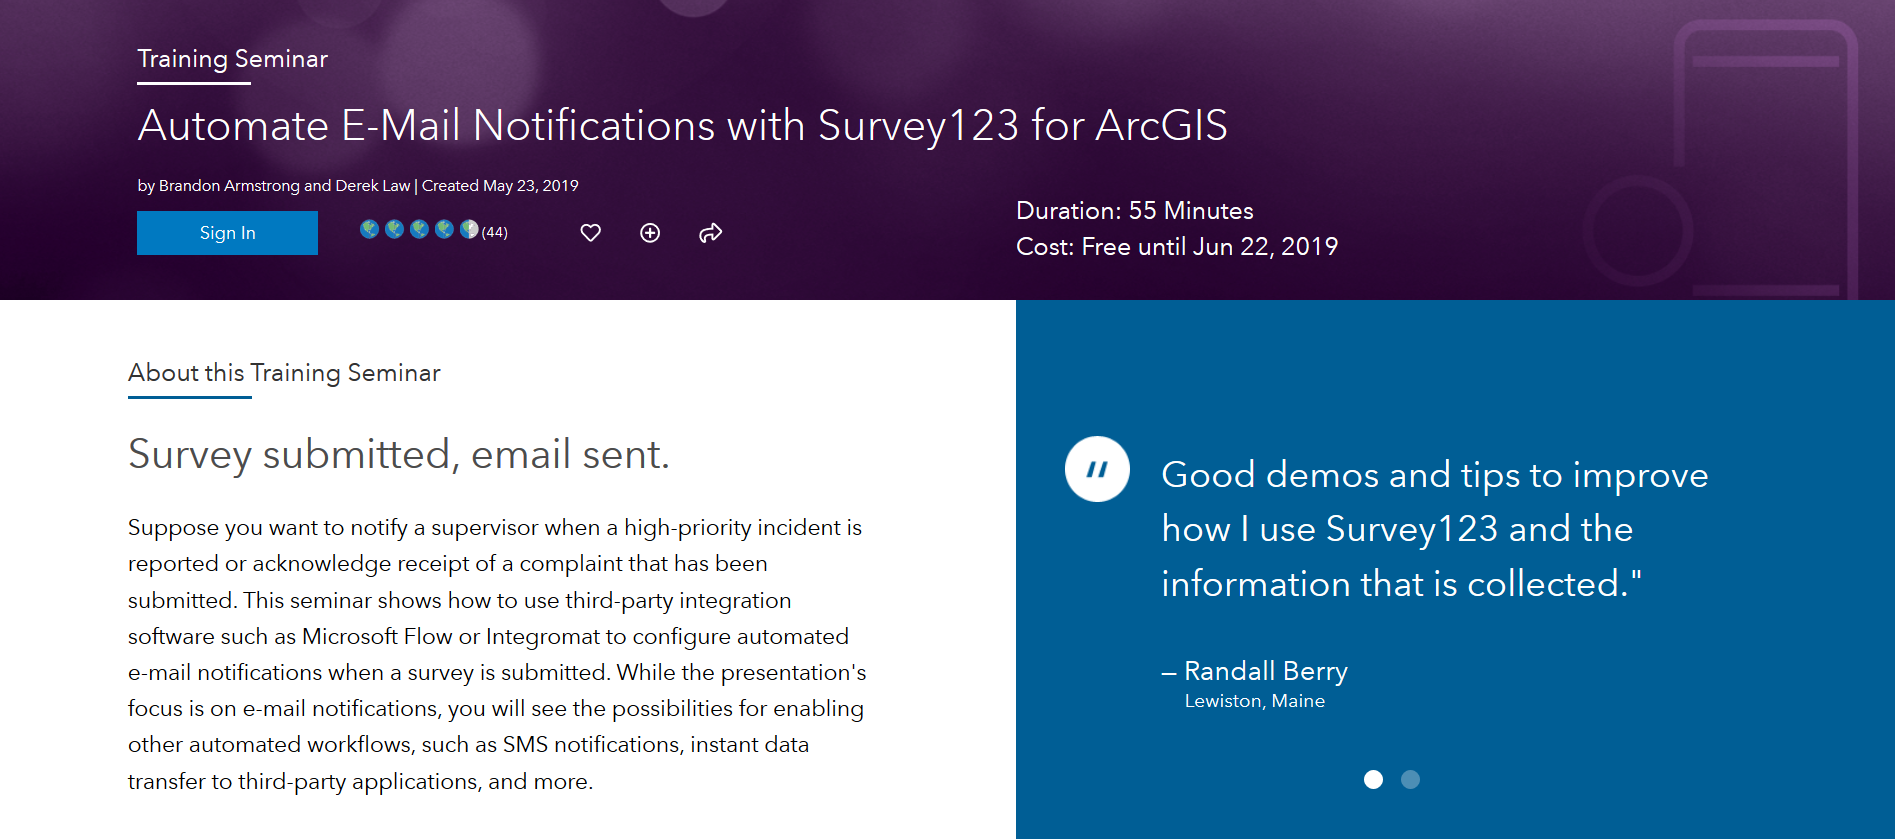 Automating e-mail notifications with Survey123 Live Training Seminar